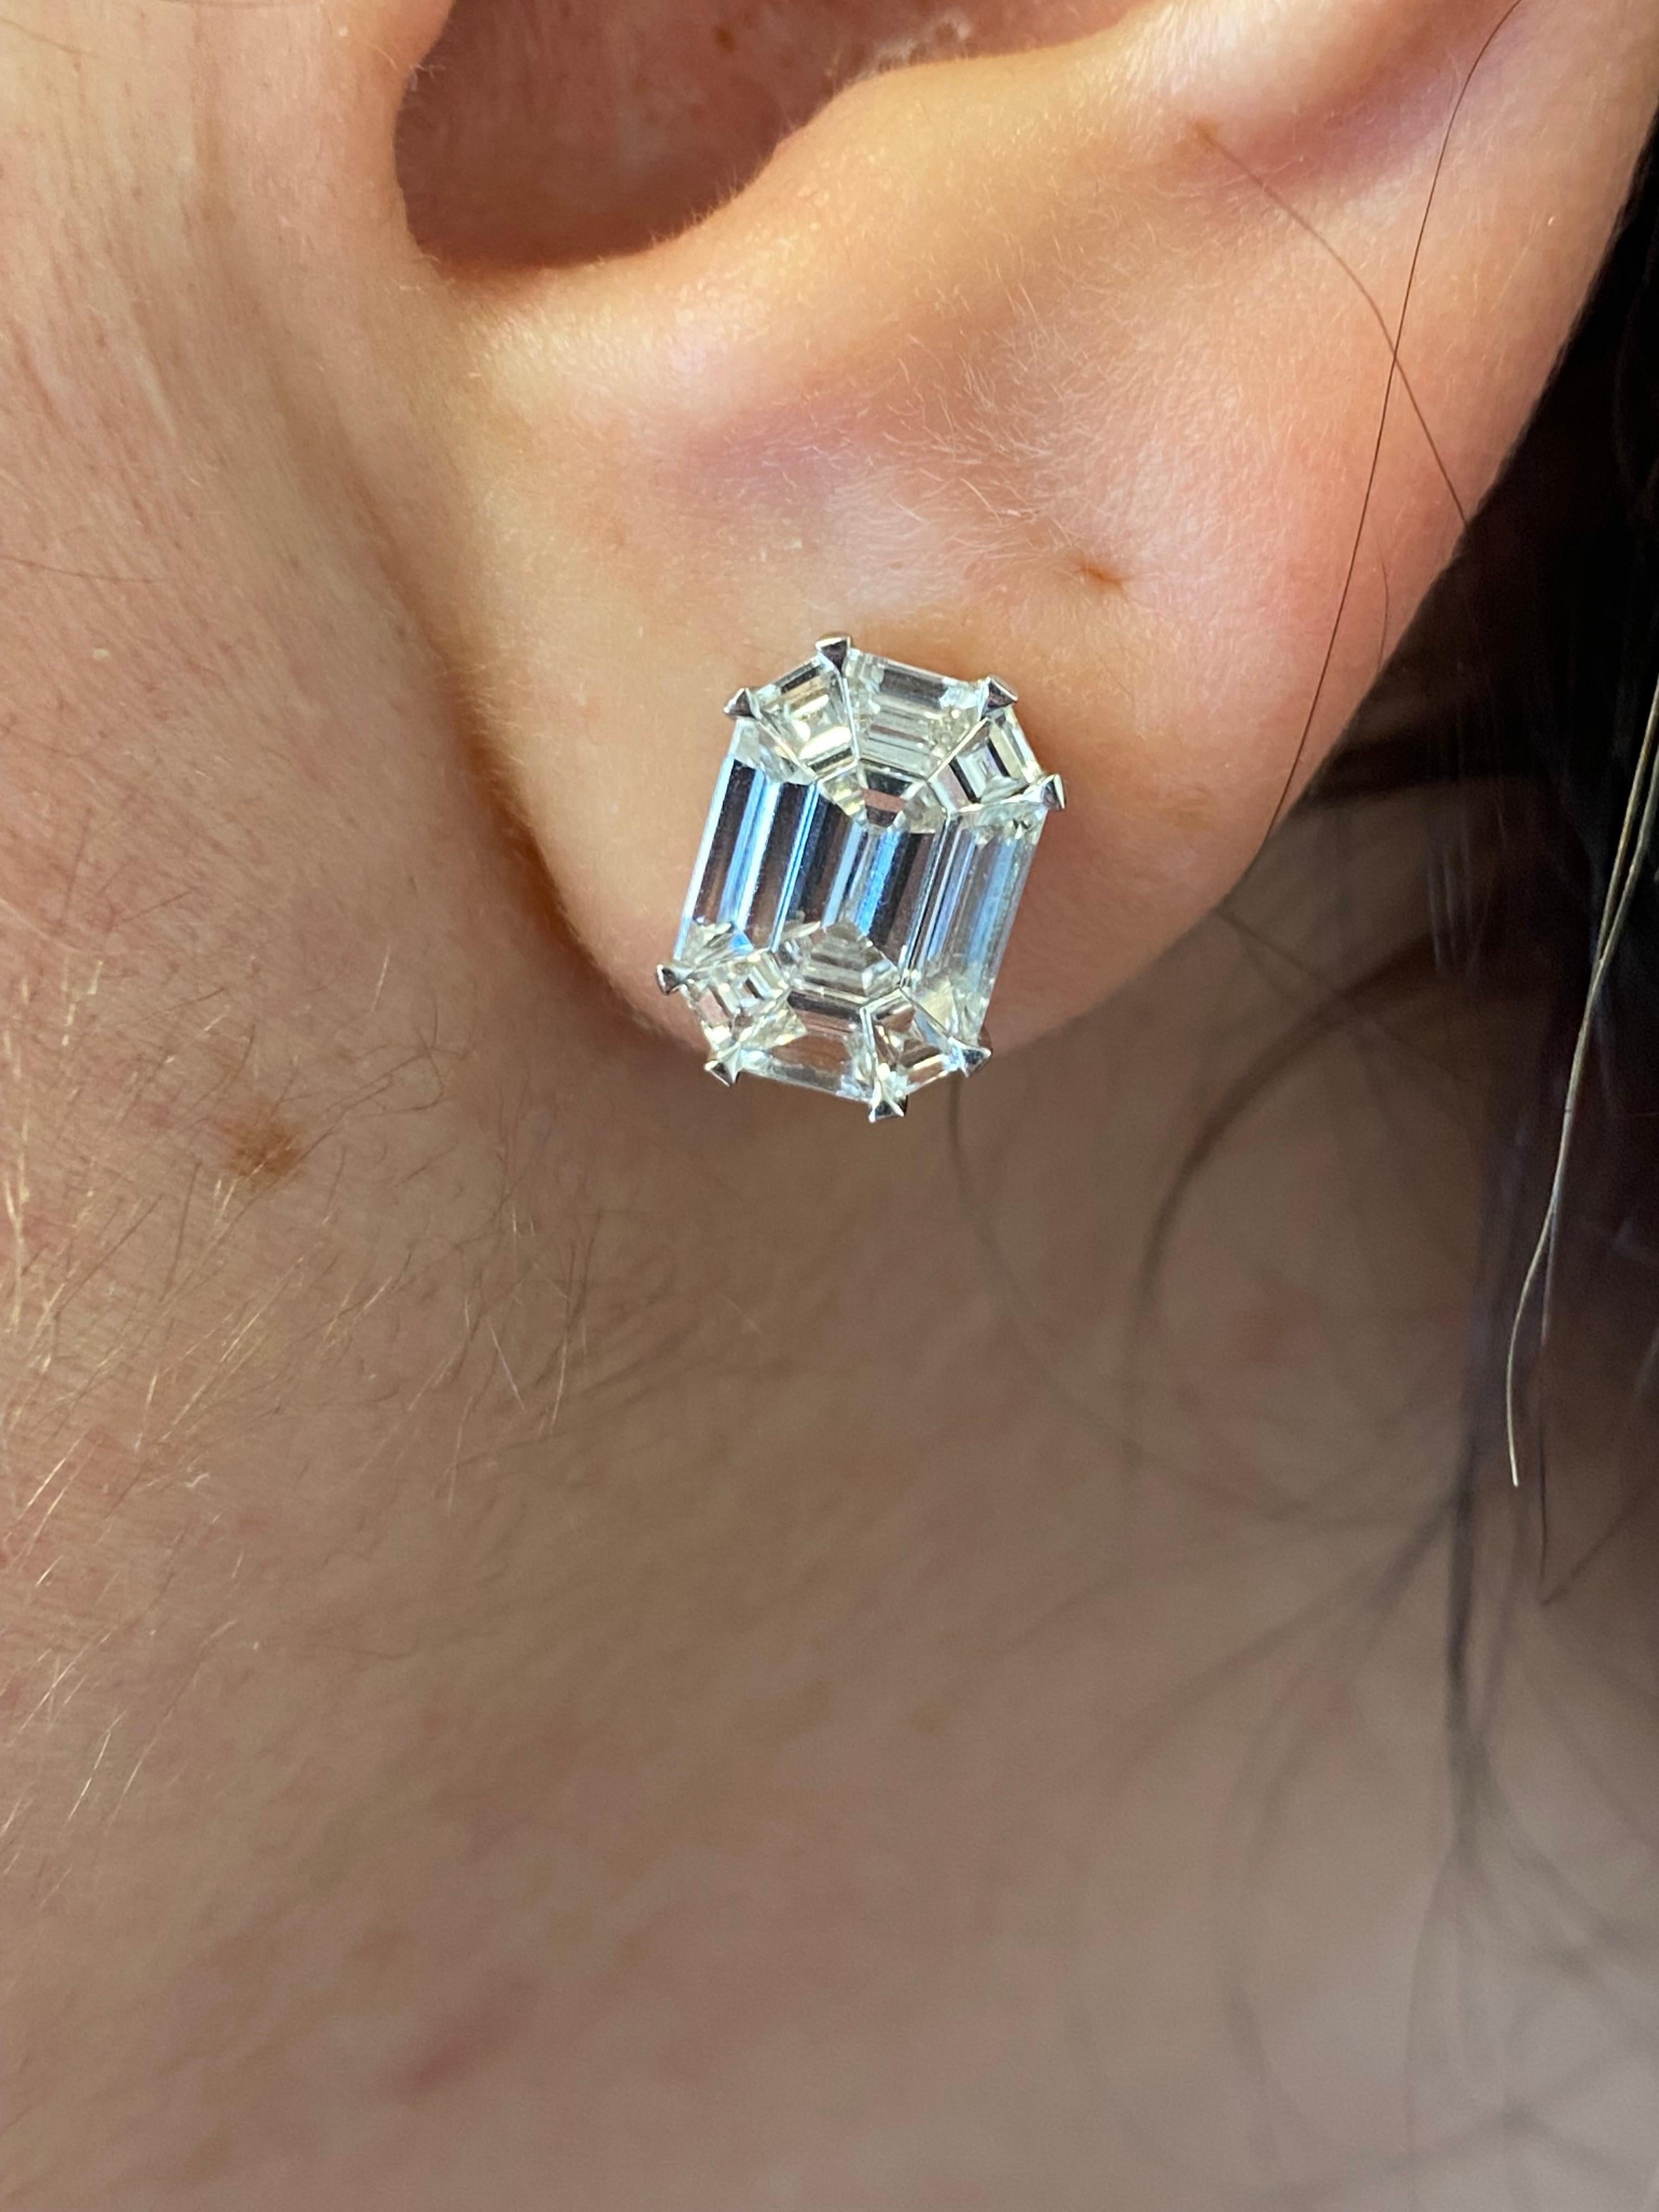 Emerald cut cluster earrings set in 18K white gold. The earrings are set in an illusion that creates the look of a 7 carats total emerald cut studs look. The earrings are set with emerald, baguette and trapezoid diamonds. The color of the stones are